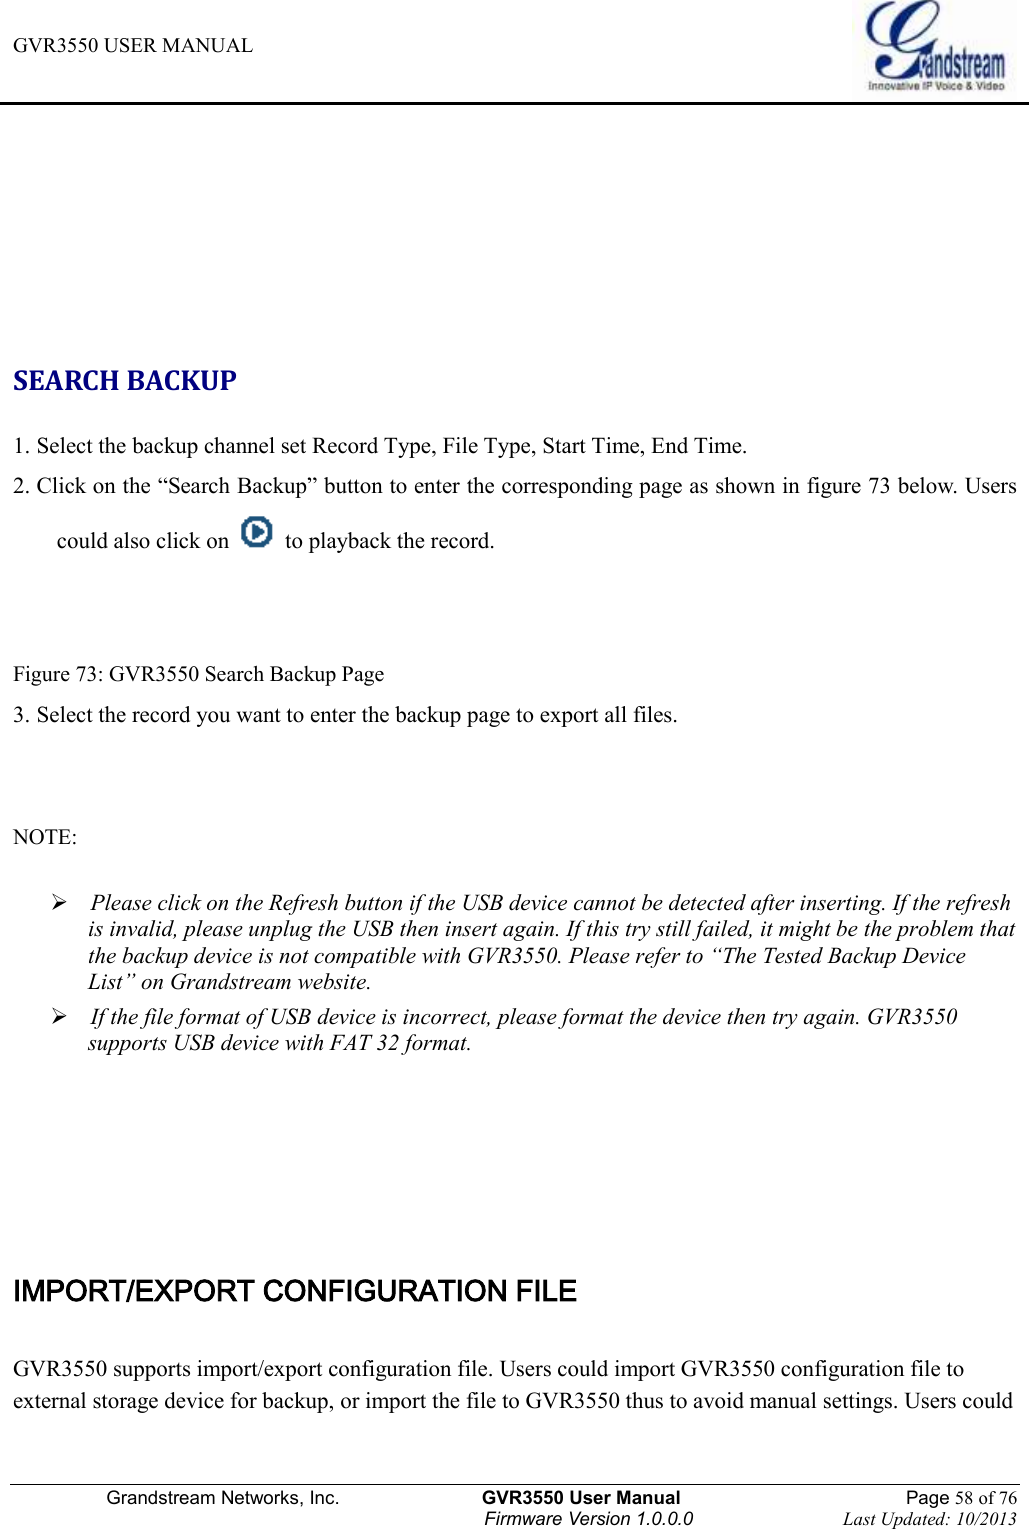 GVR3550 USER MANUAL   Grandstream Networks, Inc.                    GVR3550 User Manual                                                Page 58 of 76 Firmware Version 1.0.0.0                                Last Updated: 10/2013       SEARCH BACKUP 1. Select the backup channel set Record Type, File Type, Start Time, End Time. 2. Click on the “Search Backup” button to enter the corresponding page as shown in figure 73 below. Users could also click on    to playback the record.     Figure 73: GVR3550 Search Backup Page 3. Select the record you want to enter the backup page to export all files.   NOTE:     Please click on the Refresh button if the USB device cannot be detected after inserting. If the refresh is invalid, please unplug the USB then insert again. If this try still failed, it might be the problem that the backup device is not compatible with GVR3550. Please refer to “The Tested Backup Device List” on Grandstream website.  If the file format of USB device is incorrect, please format the device then try again. GVR3550 supports USB device with FAT 32 format.     IMPORT/EXPORT CONFIGURATION FILE GVR3550 supports import/export configuration file. Users could import GVR3550 configuration file to external storage device for backup, or import the file to GVR3550 thus to avoid manual settings. Users could 